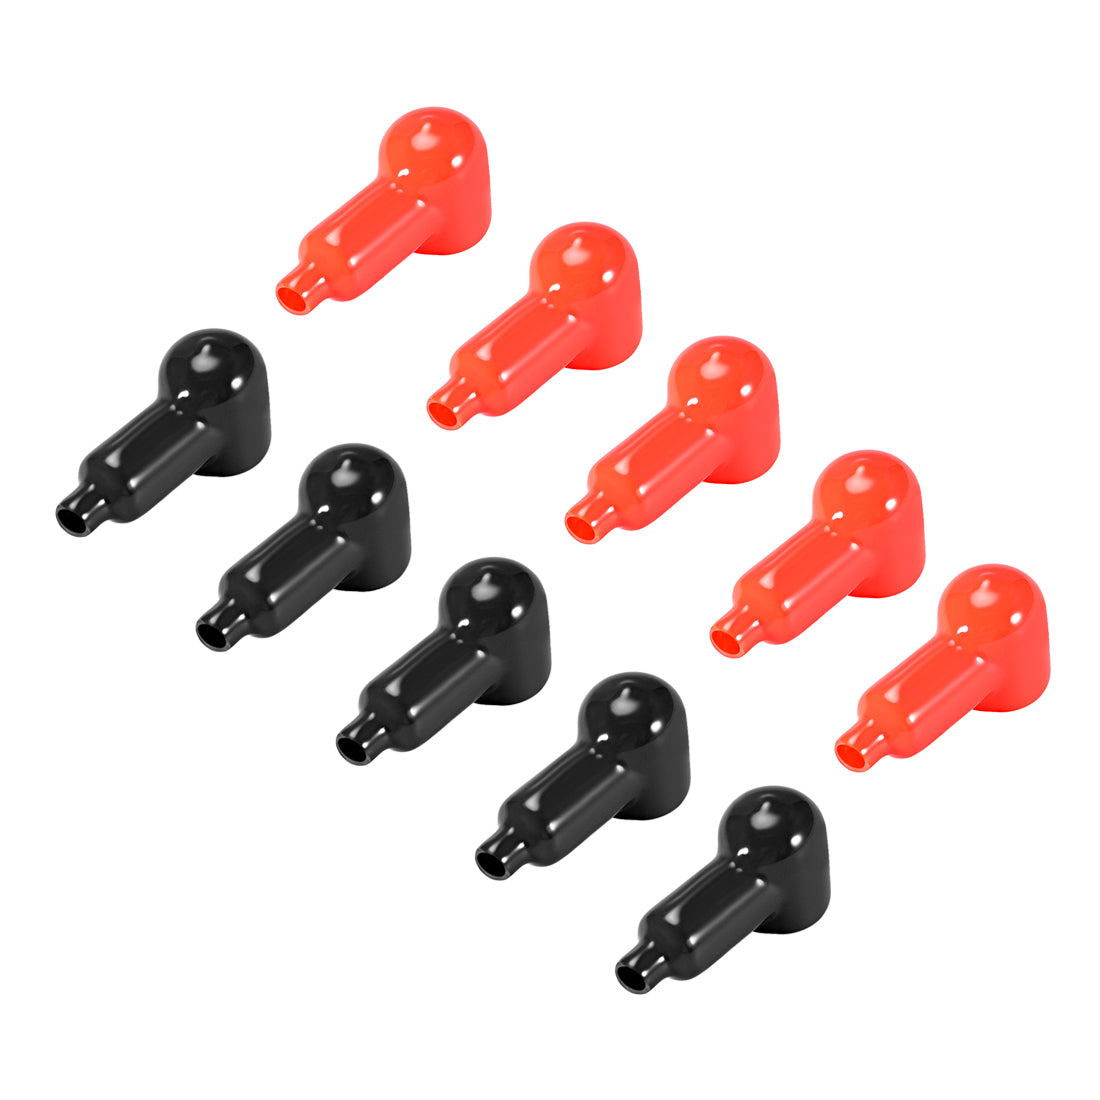 uxcell Uxcell Battery Terminal Insulating Rubber Protector Covers for 20mm Terminal 6mm Cable Red Black 5 Pairs